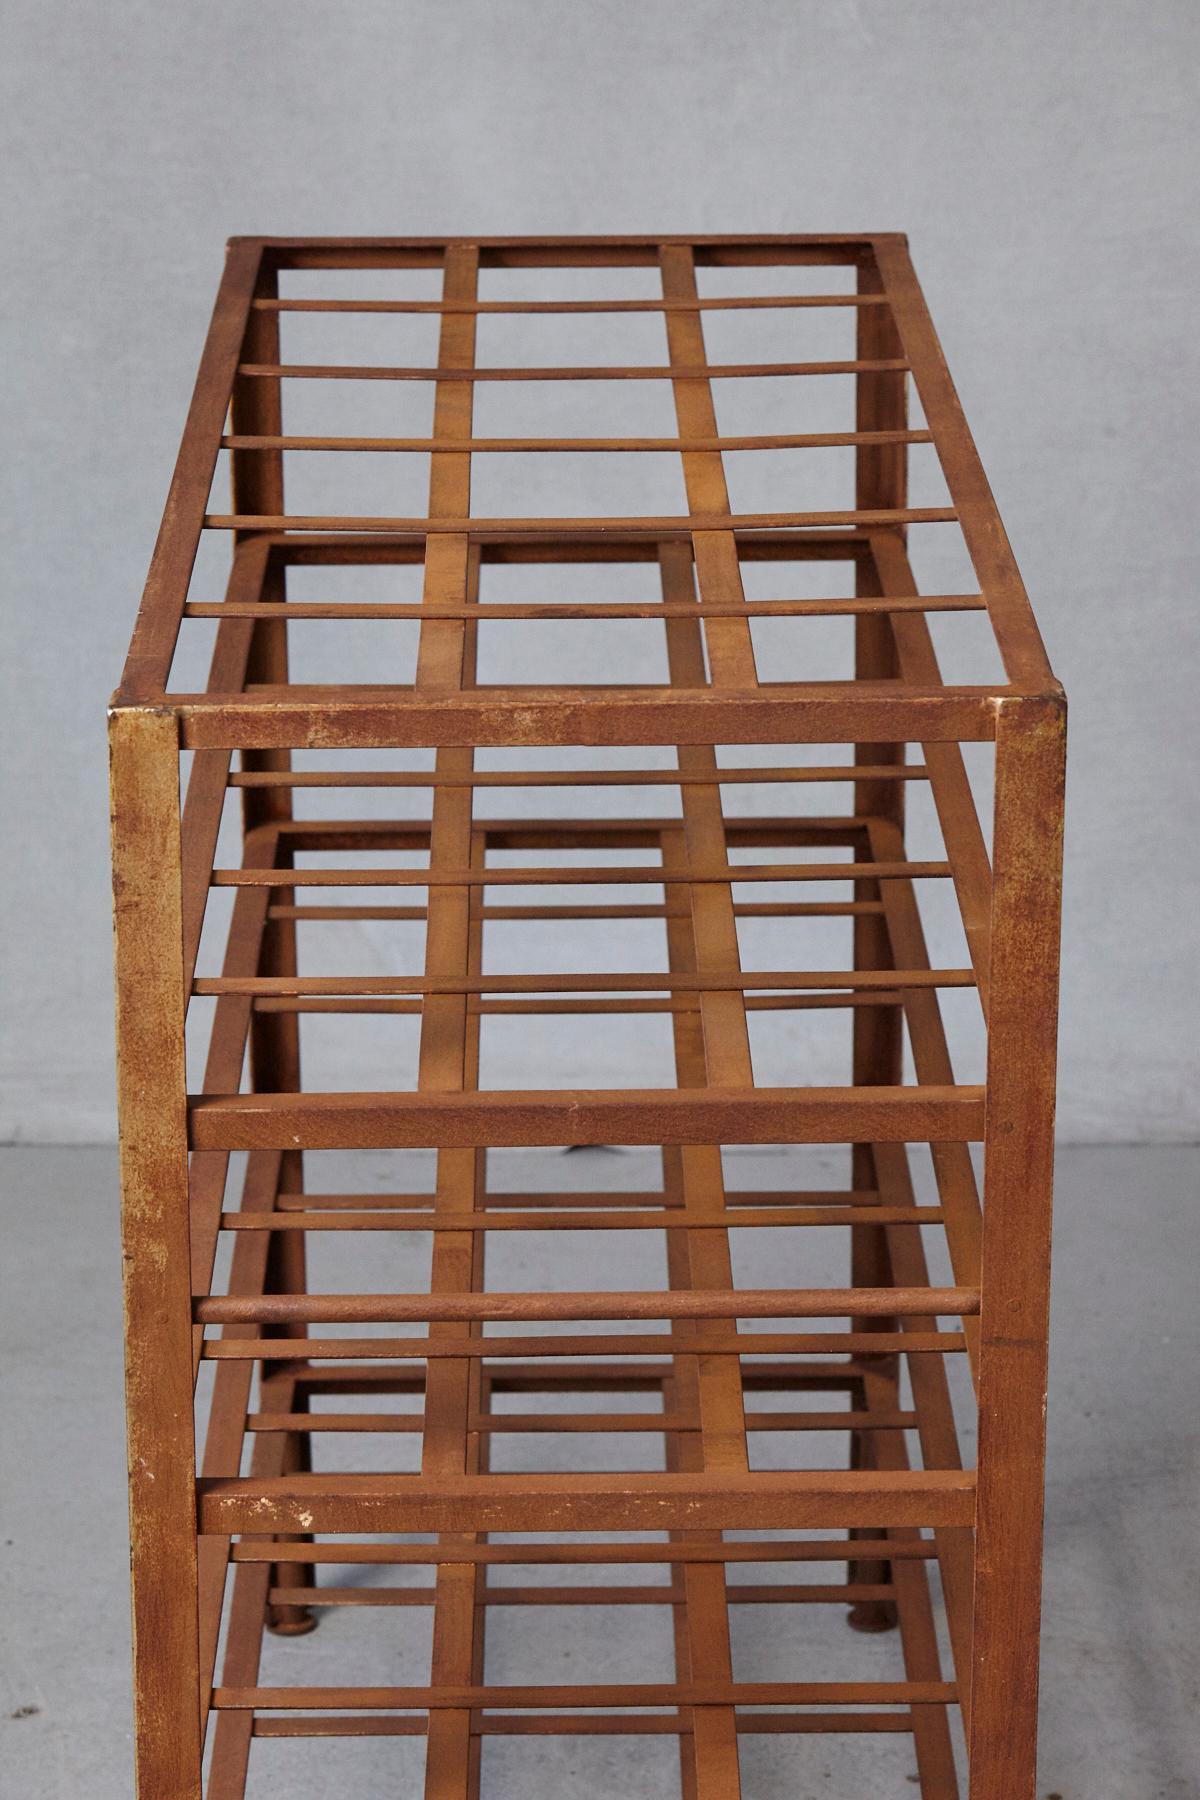 Iron Industrial 5 Tier Shelf with Grid Shelves for Books or Usage as Seedling Planter For Sale